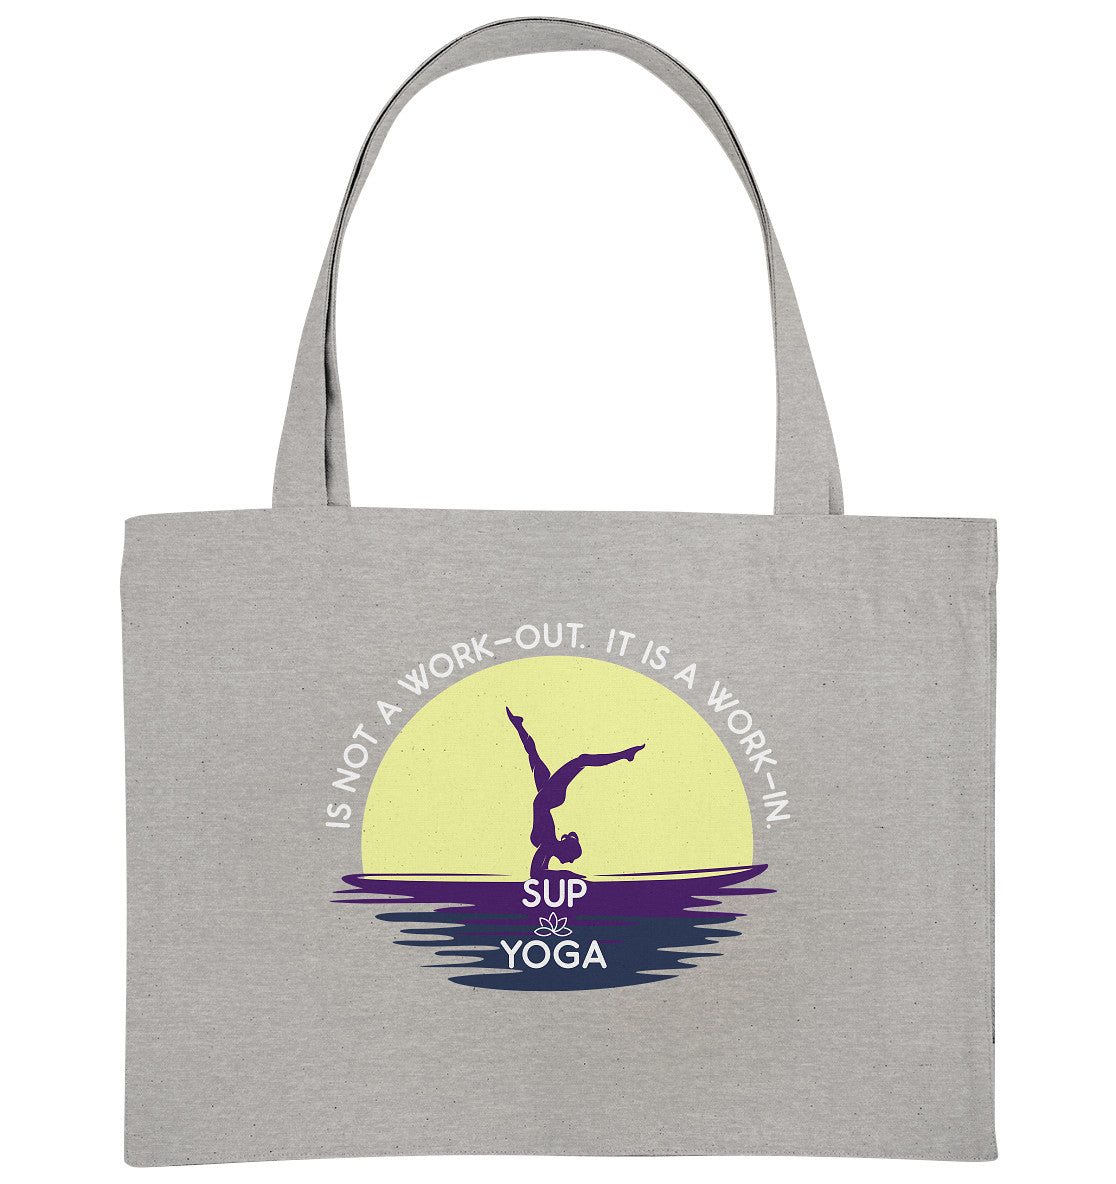 SUP YOGA IS NOT A WORK-OUT.  IT IS A WORK-IN.  - Organic Shopping-Bag